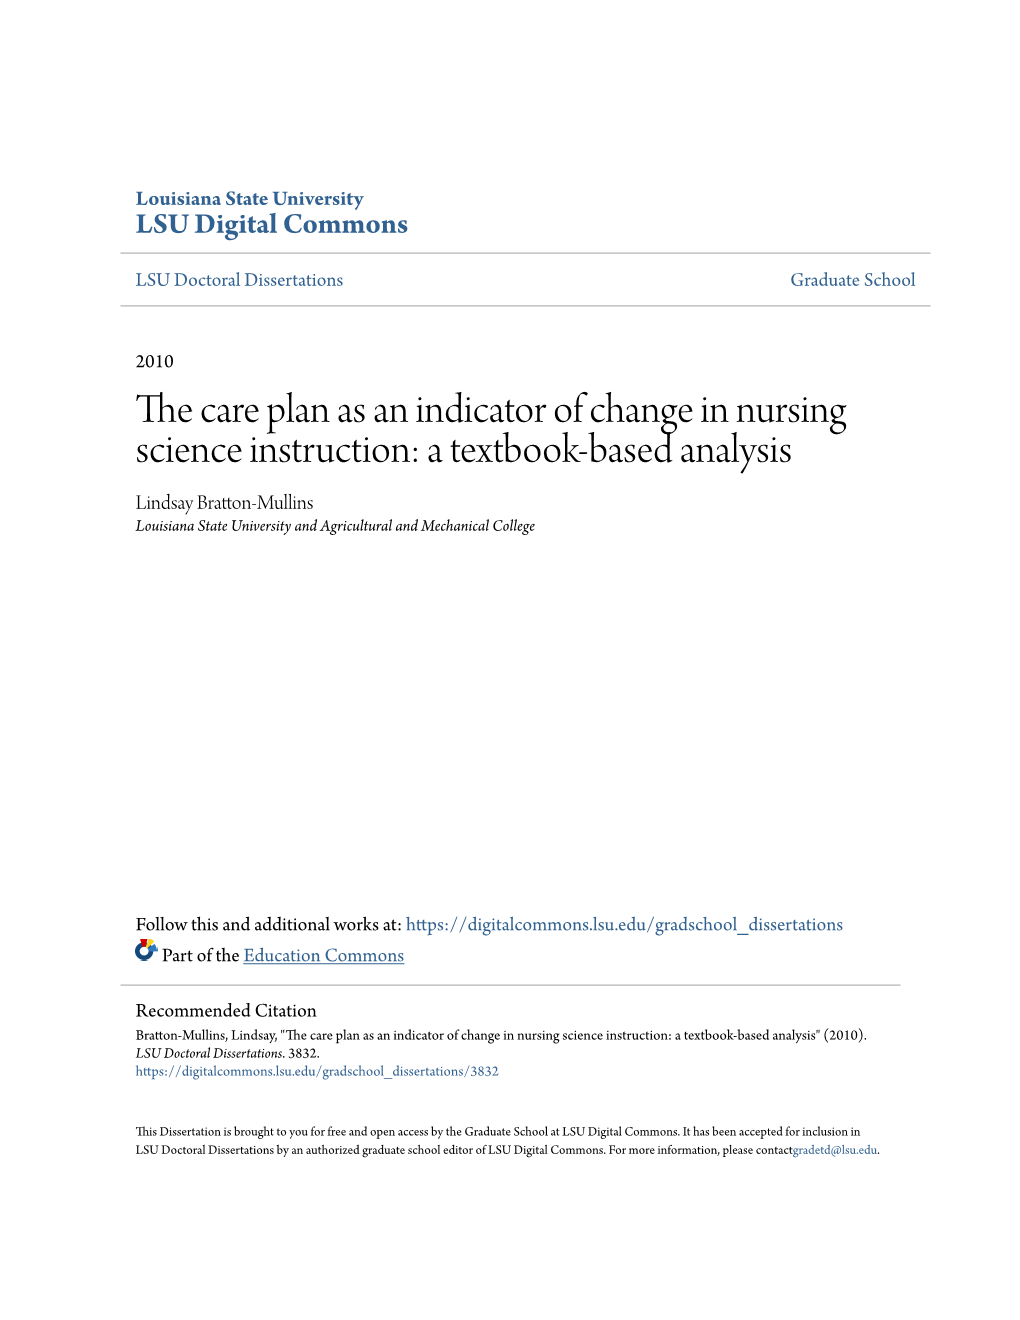 The Care Plan As an Indicator of Change in Nursing Science Instruction: a Textbook-Based Analysis" (2010)